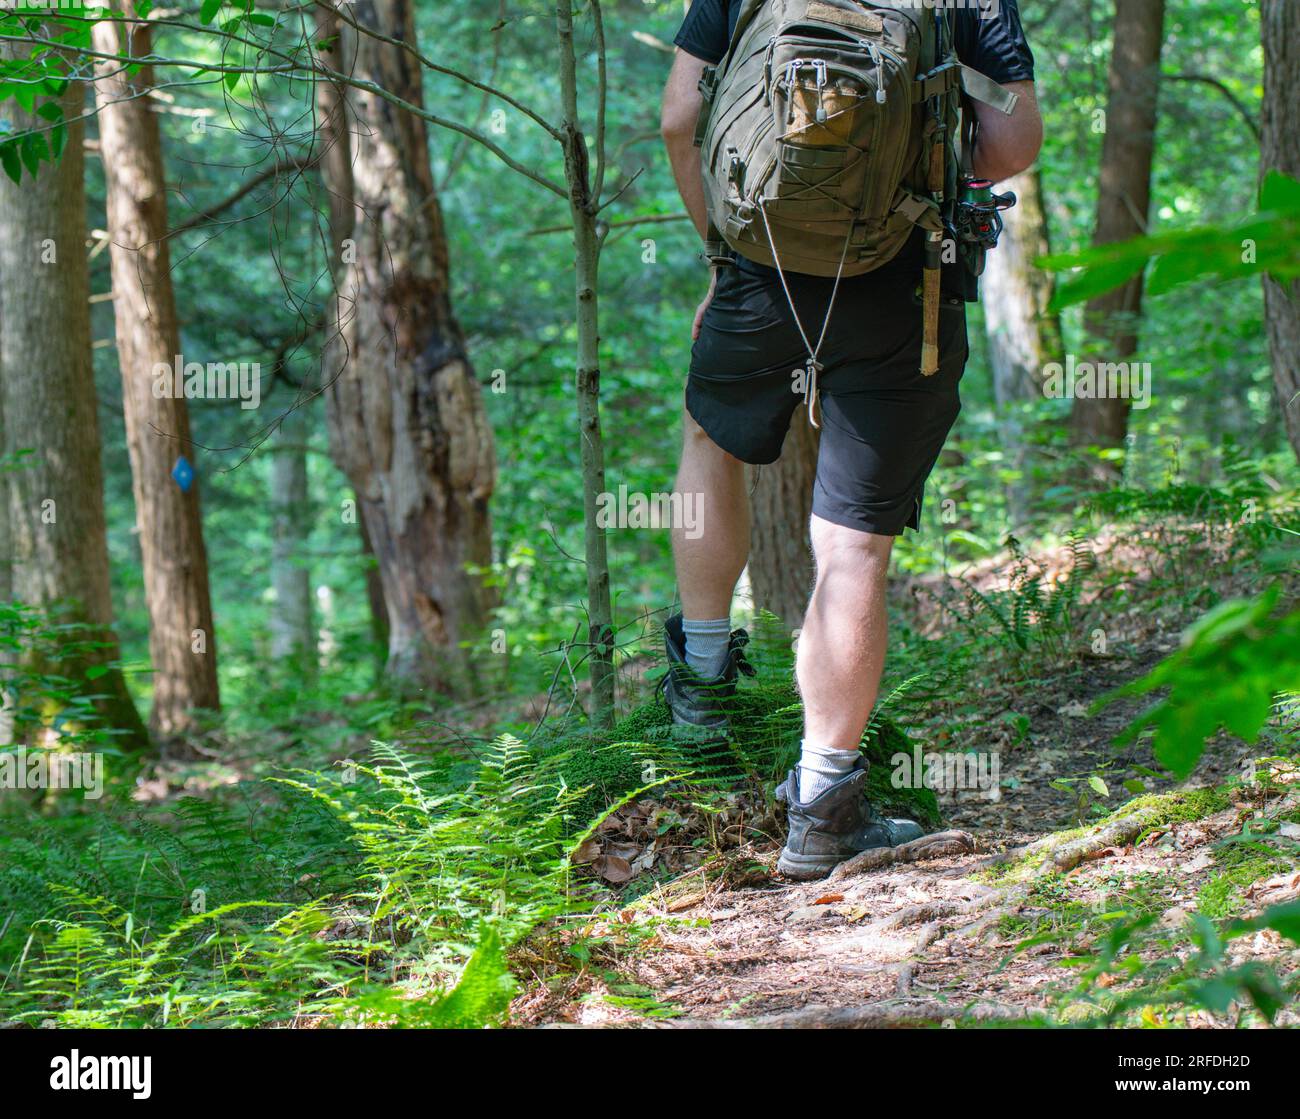 Hiker on a woodland trail, trail signs, natural background copy space image, active lifestyle Stock Photo